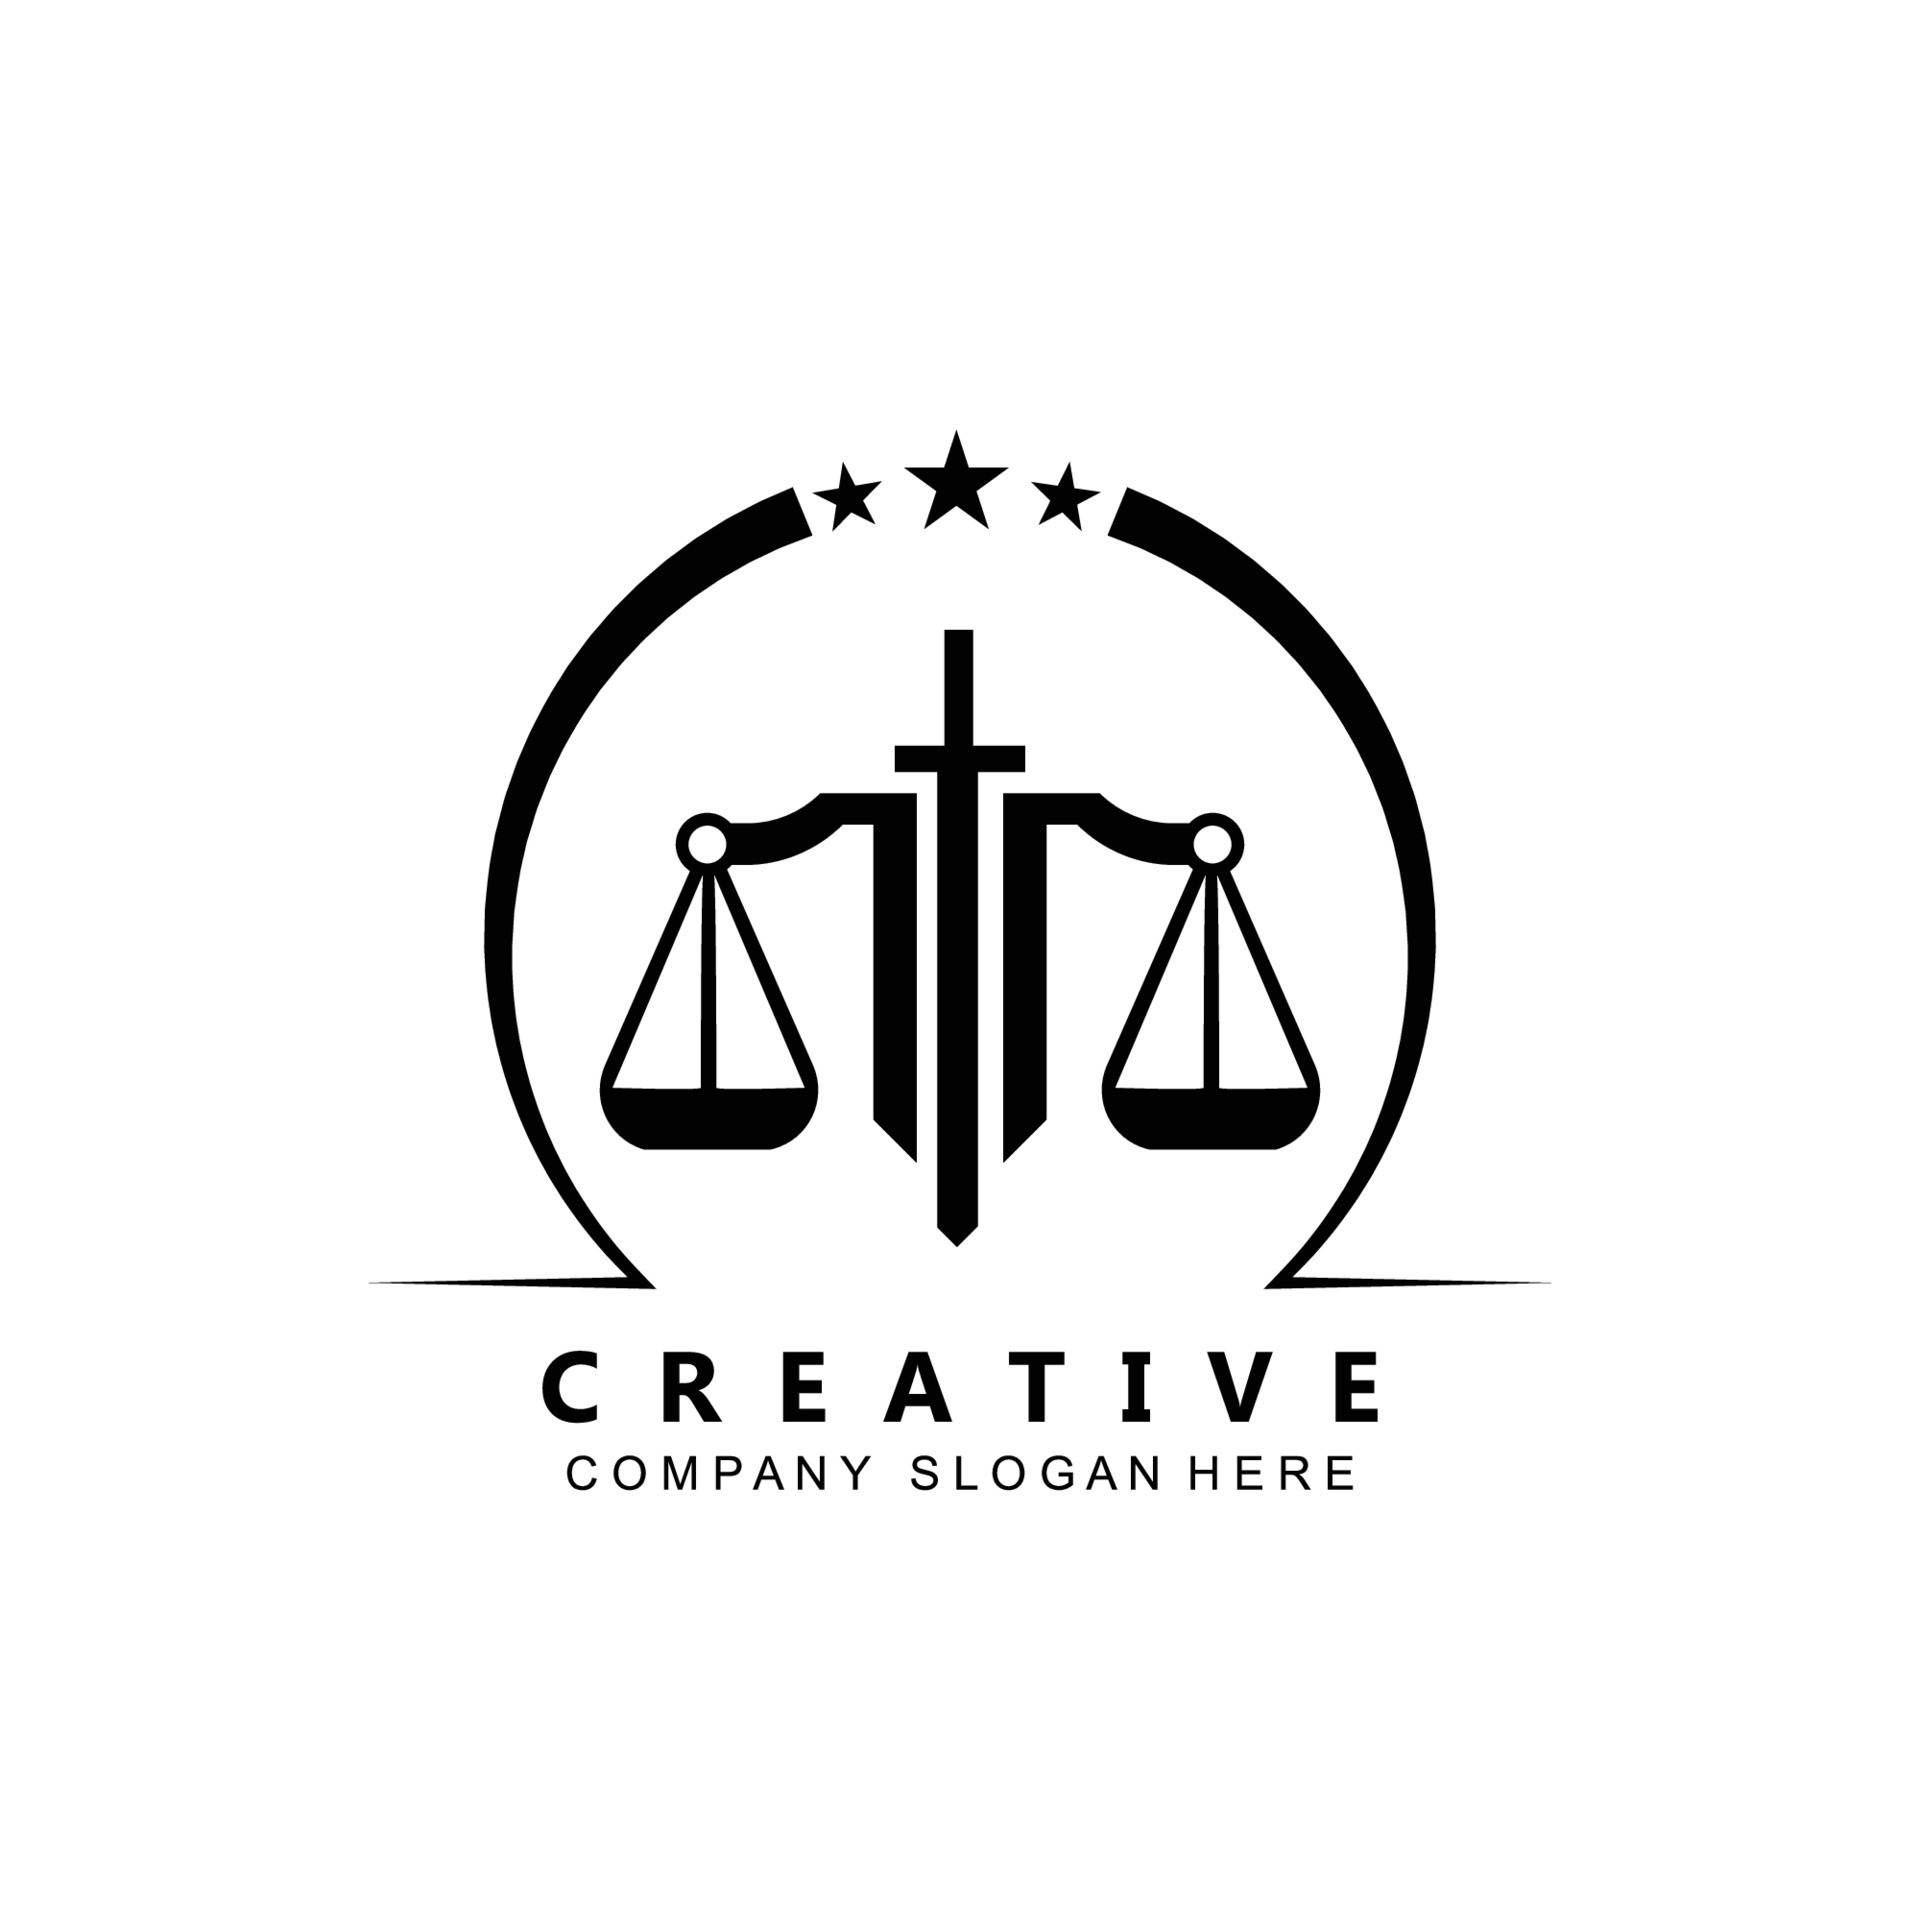 Lawyer or Justice law logo vector design, icon illustration 7686922 ...